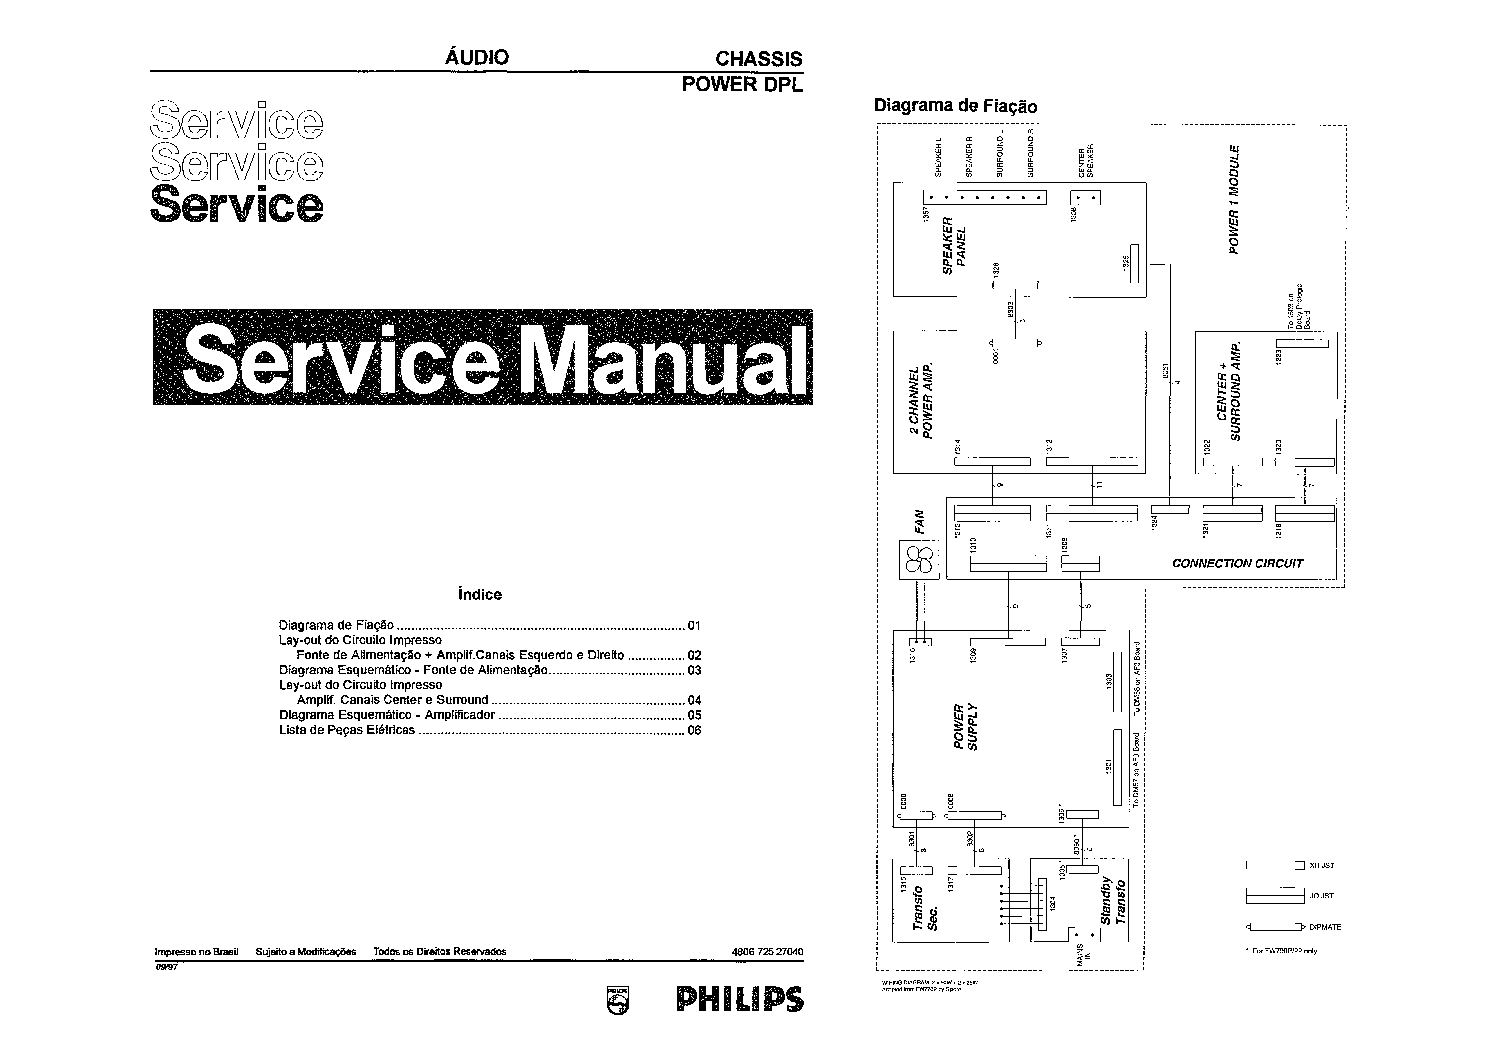 PHILIPS POWER-DPL SM service manual (1st page)